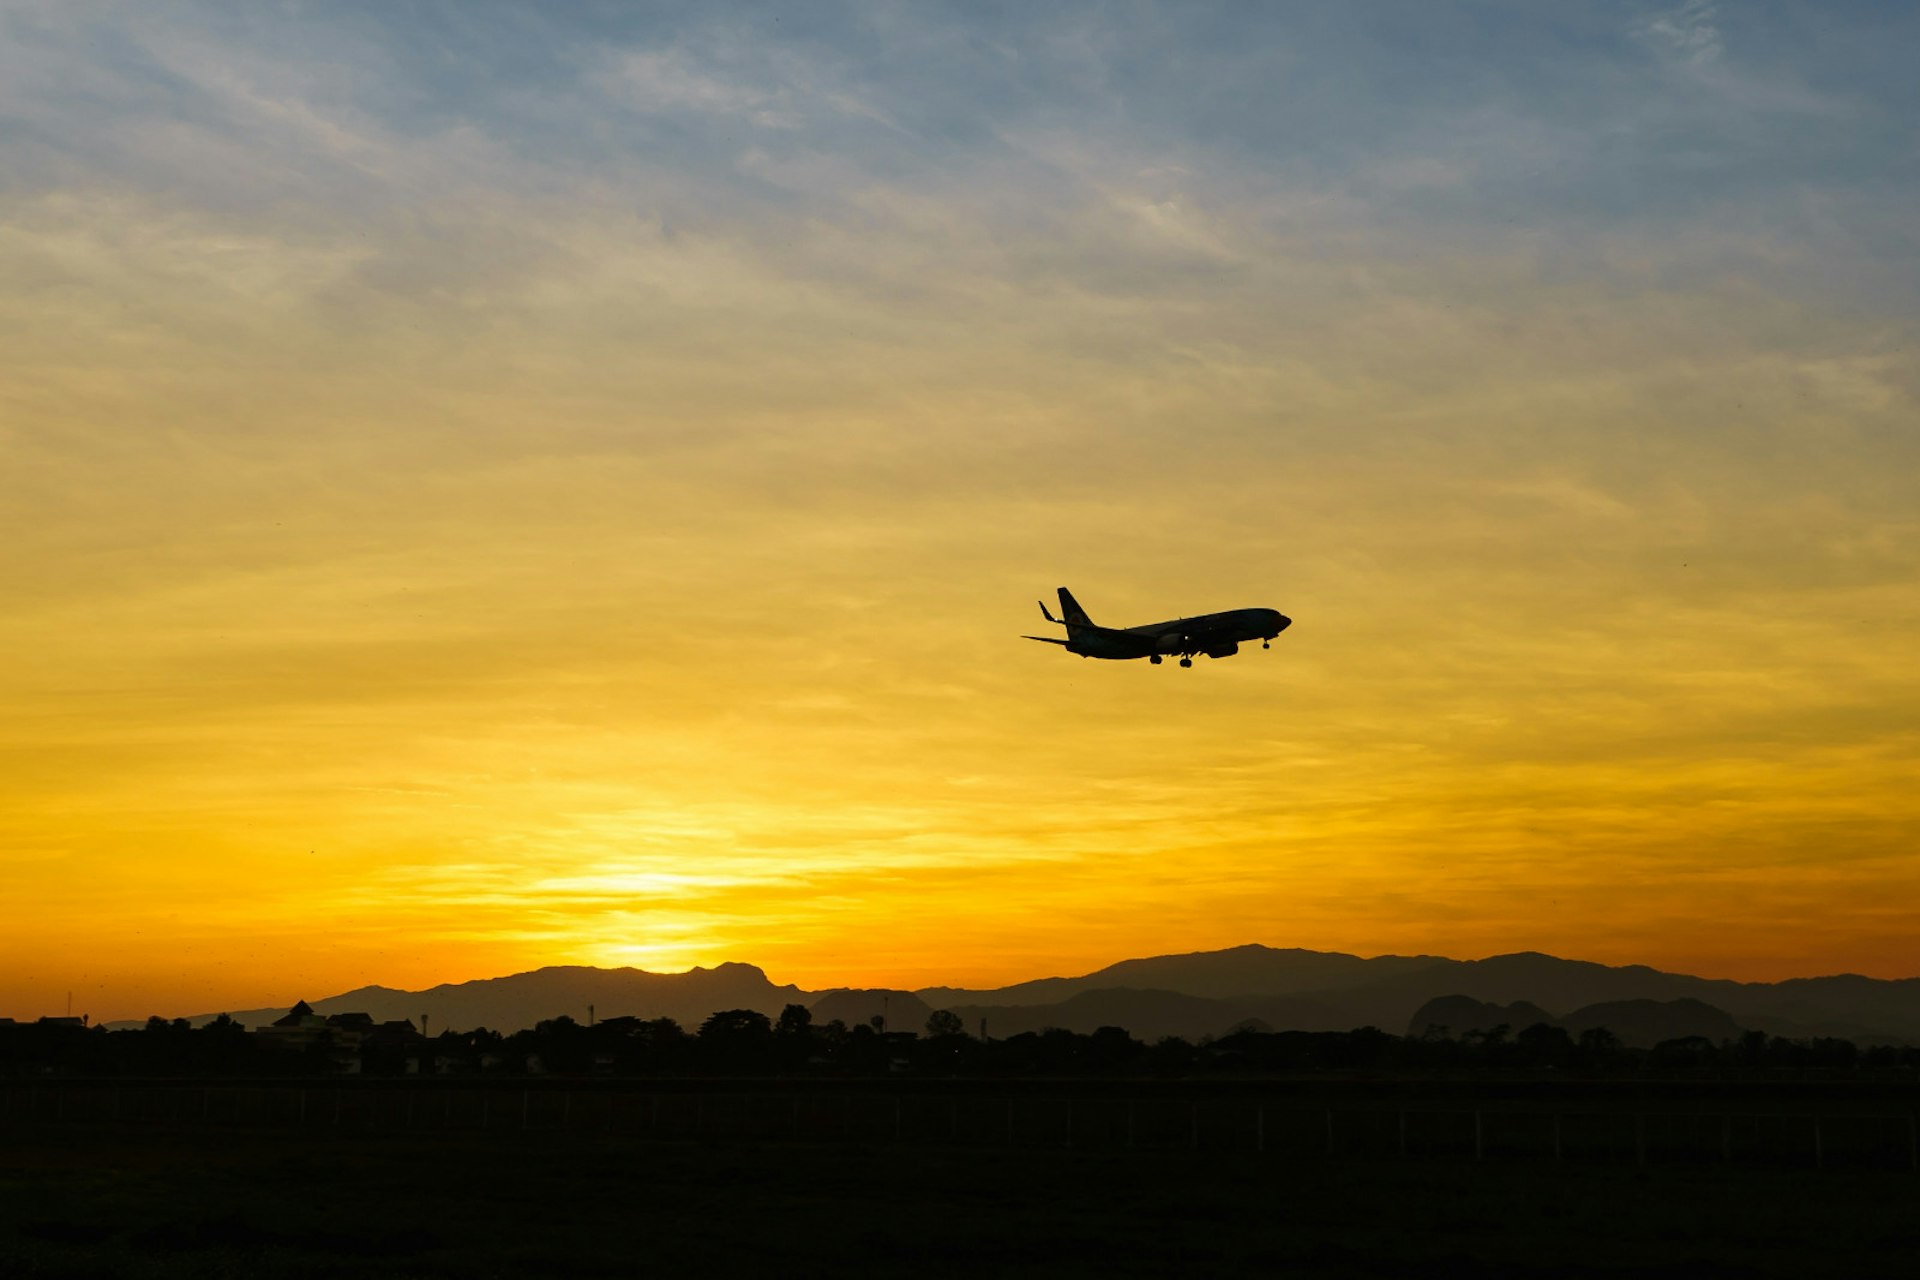 An orange and yellow horizon with a silhouette of a plane flying in the sky.